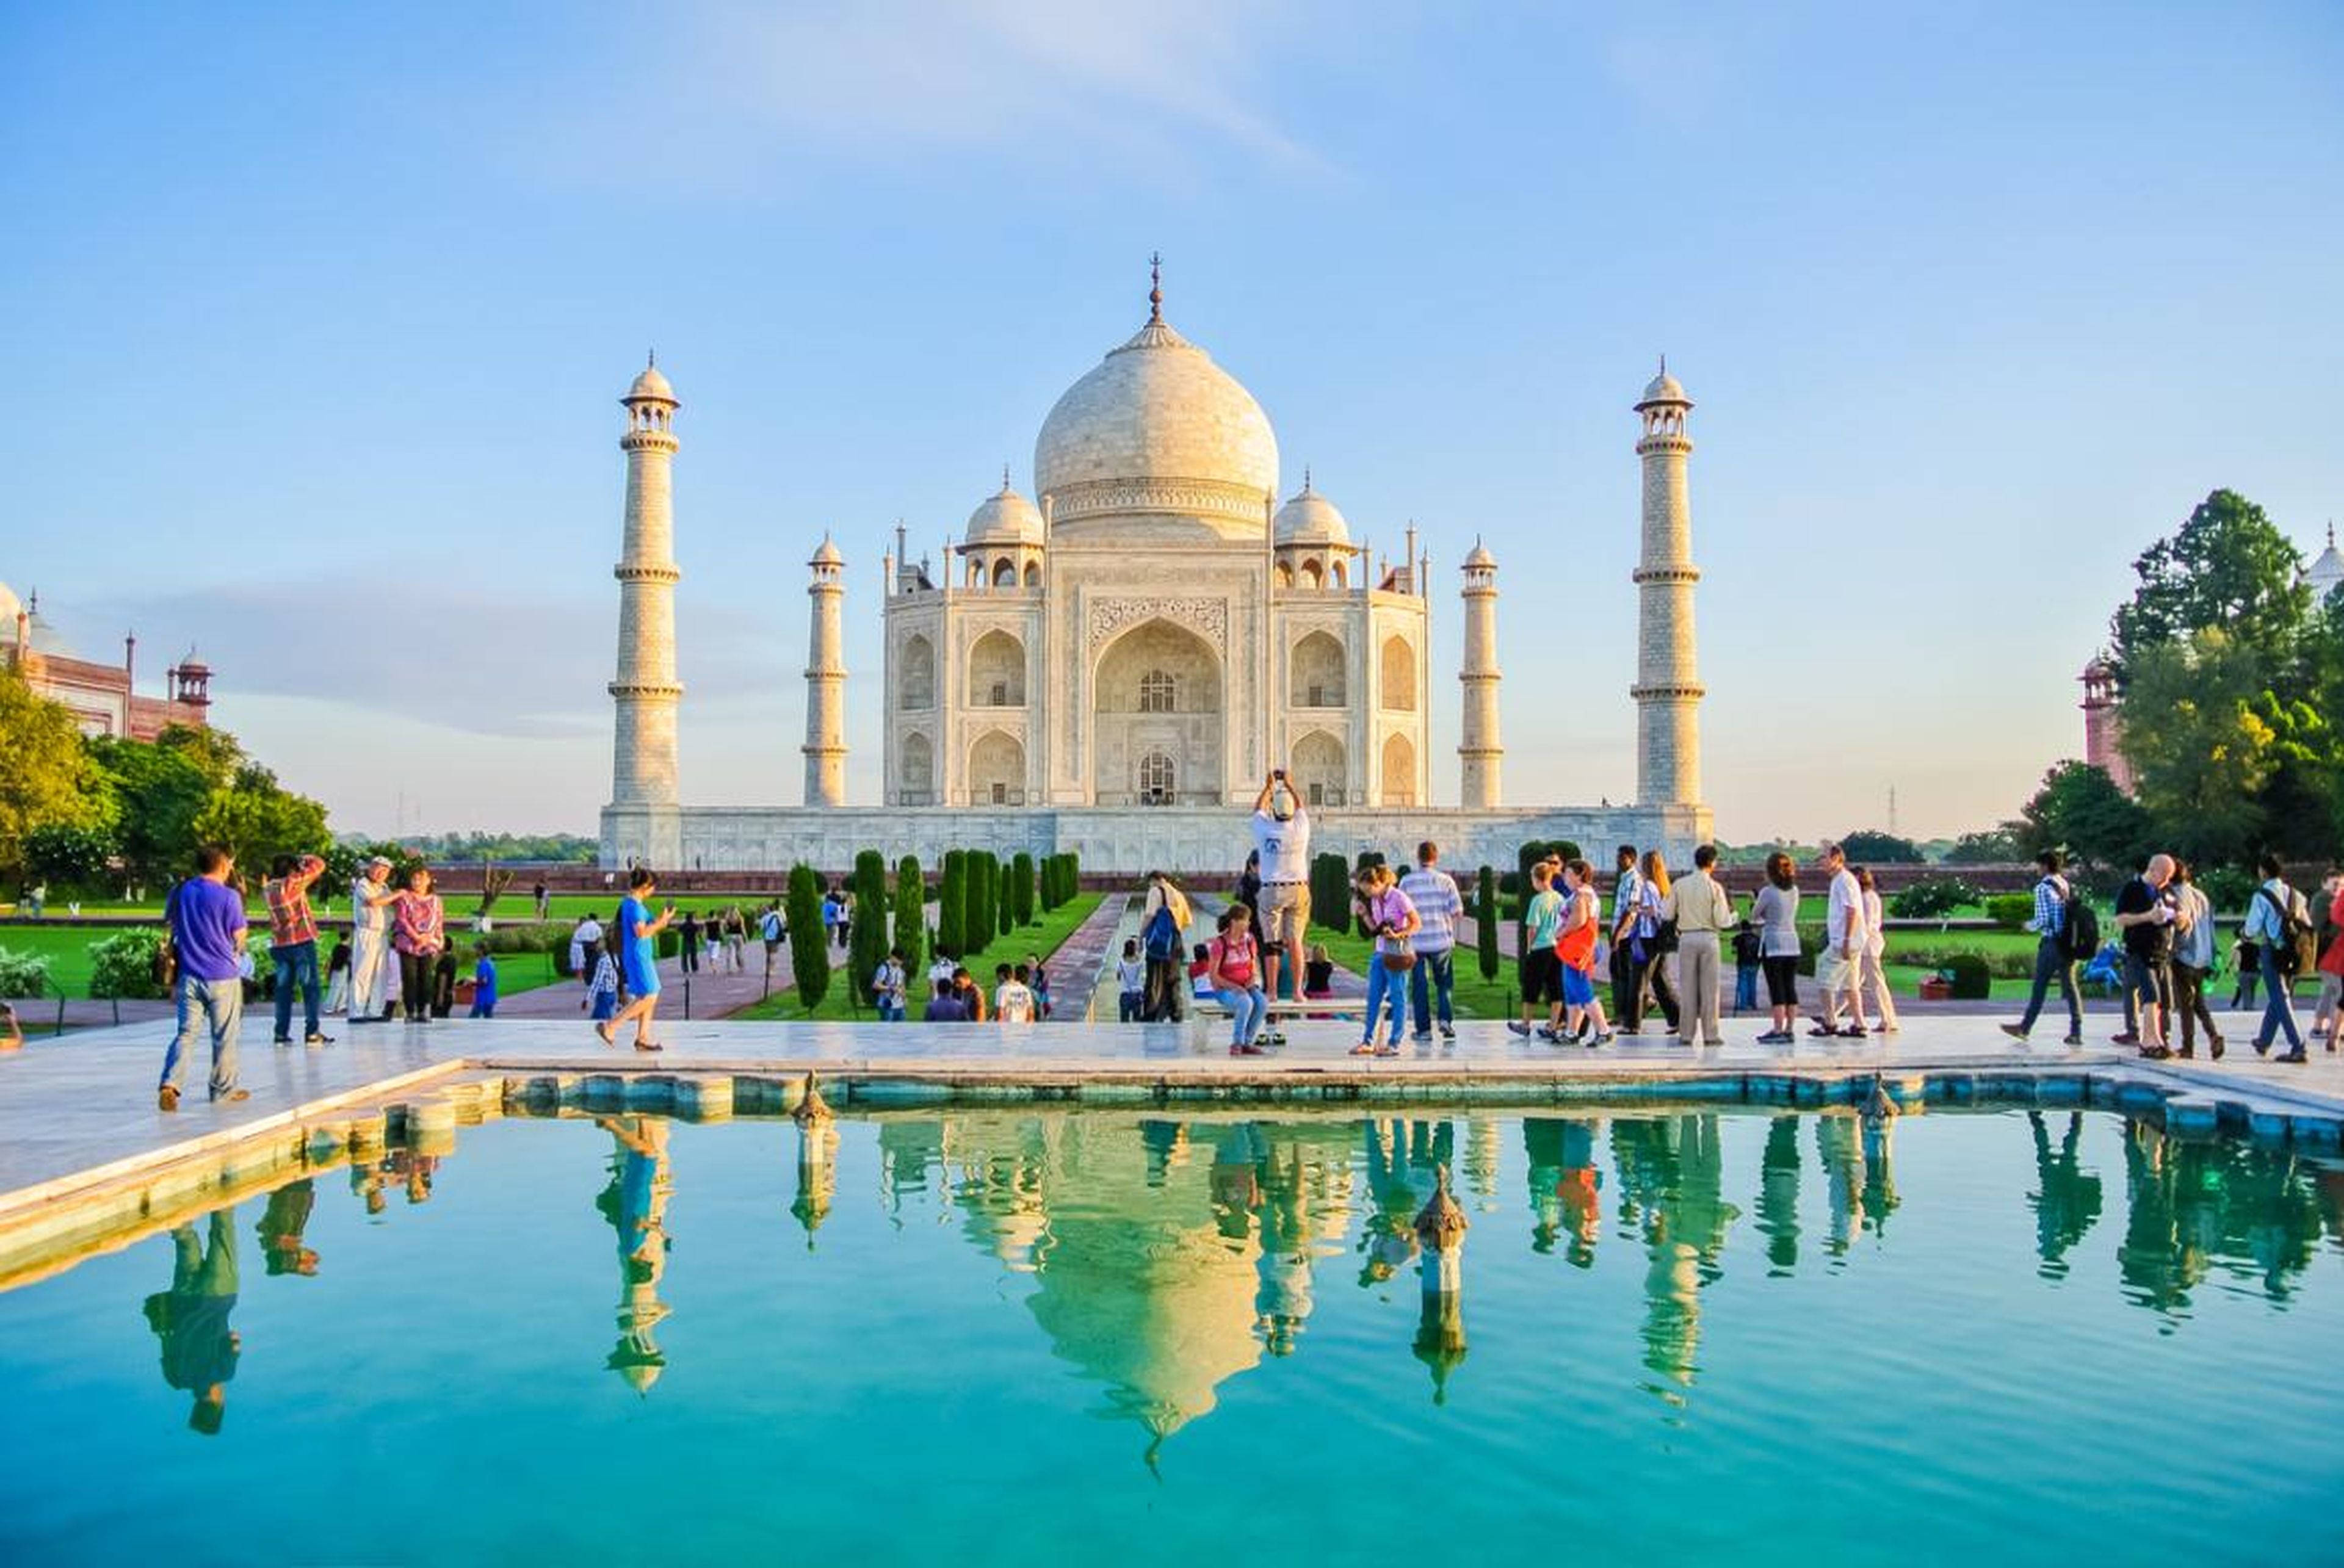 The Taj Mahal is an instantly recognizable symbol of India — and also often surrounded by tourists.